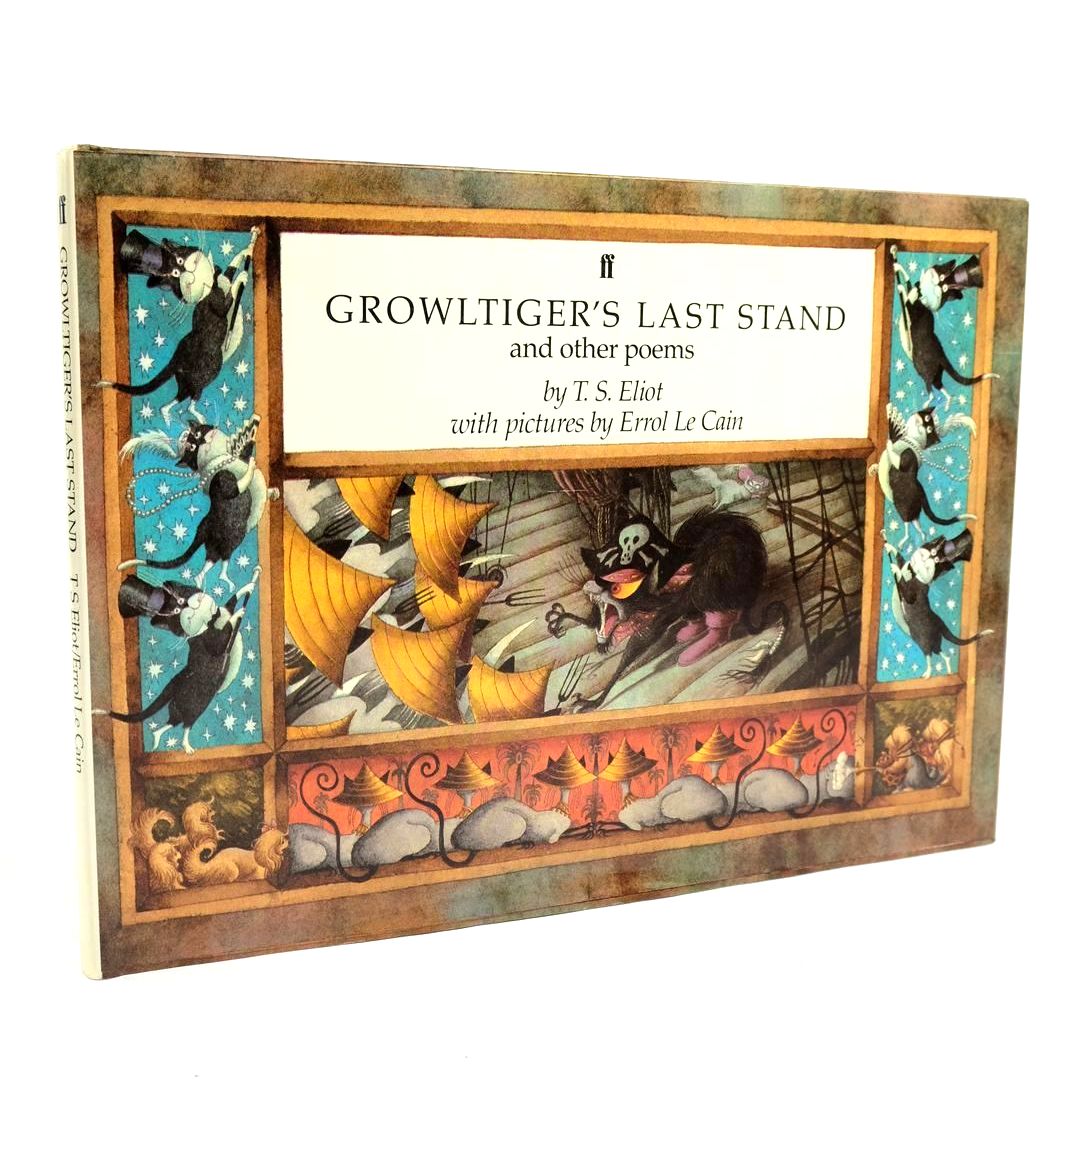 Photo of GROWLTIGER'S LAST STAND AND OTHER POEMS written by Eliot, T.S. illustrated by Le Cain, Errol published by Faber &amp; Faber (STOCK CODE: 1321619)  for sale by Stella & Rose's Books